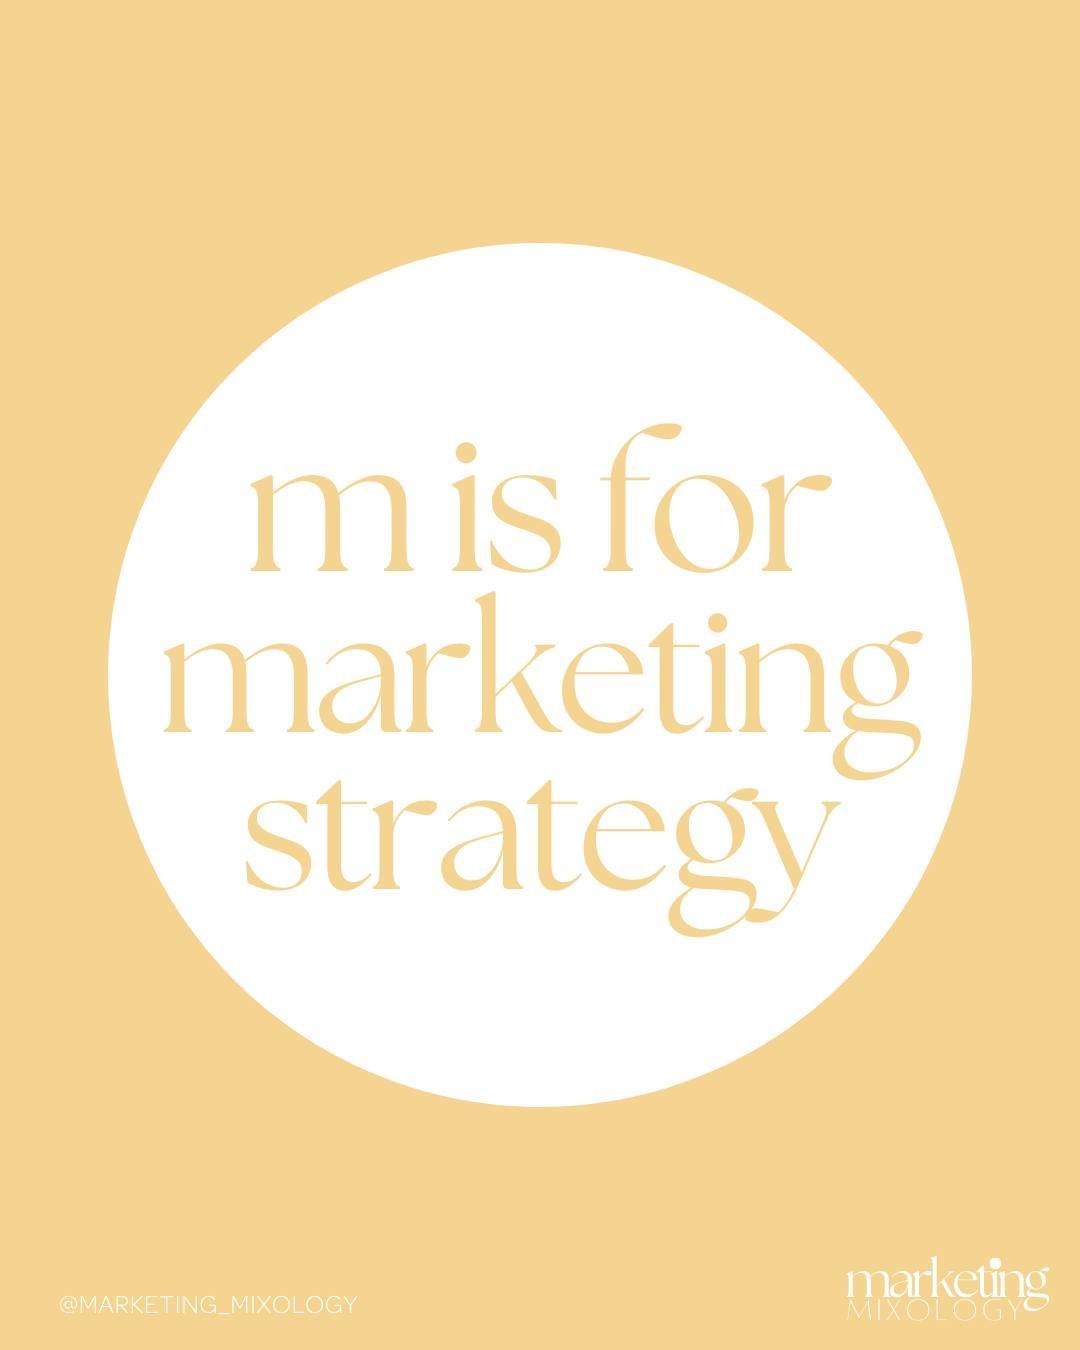 Welcome to the M of my marketing a to z - today we're going to be looking at Marketing Strategy. 

So I know it can be really tempting to jump straight in to the &quot;doing&quot; when it comes to your marketing BUT having a well thought out plan wil